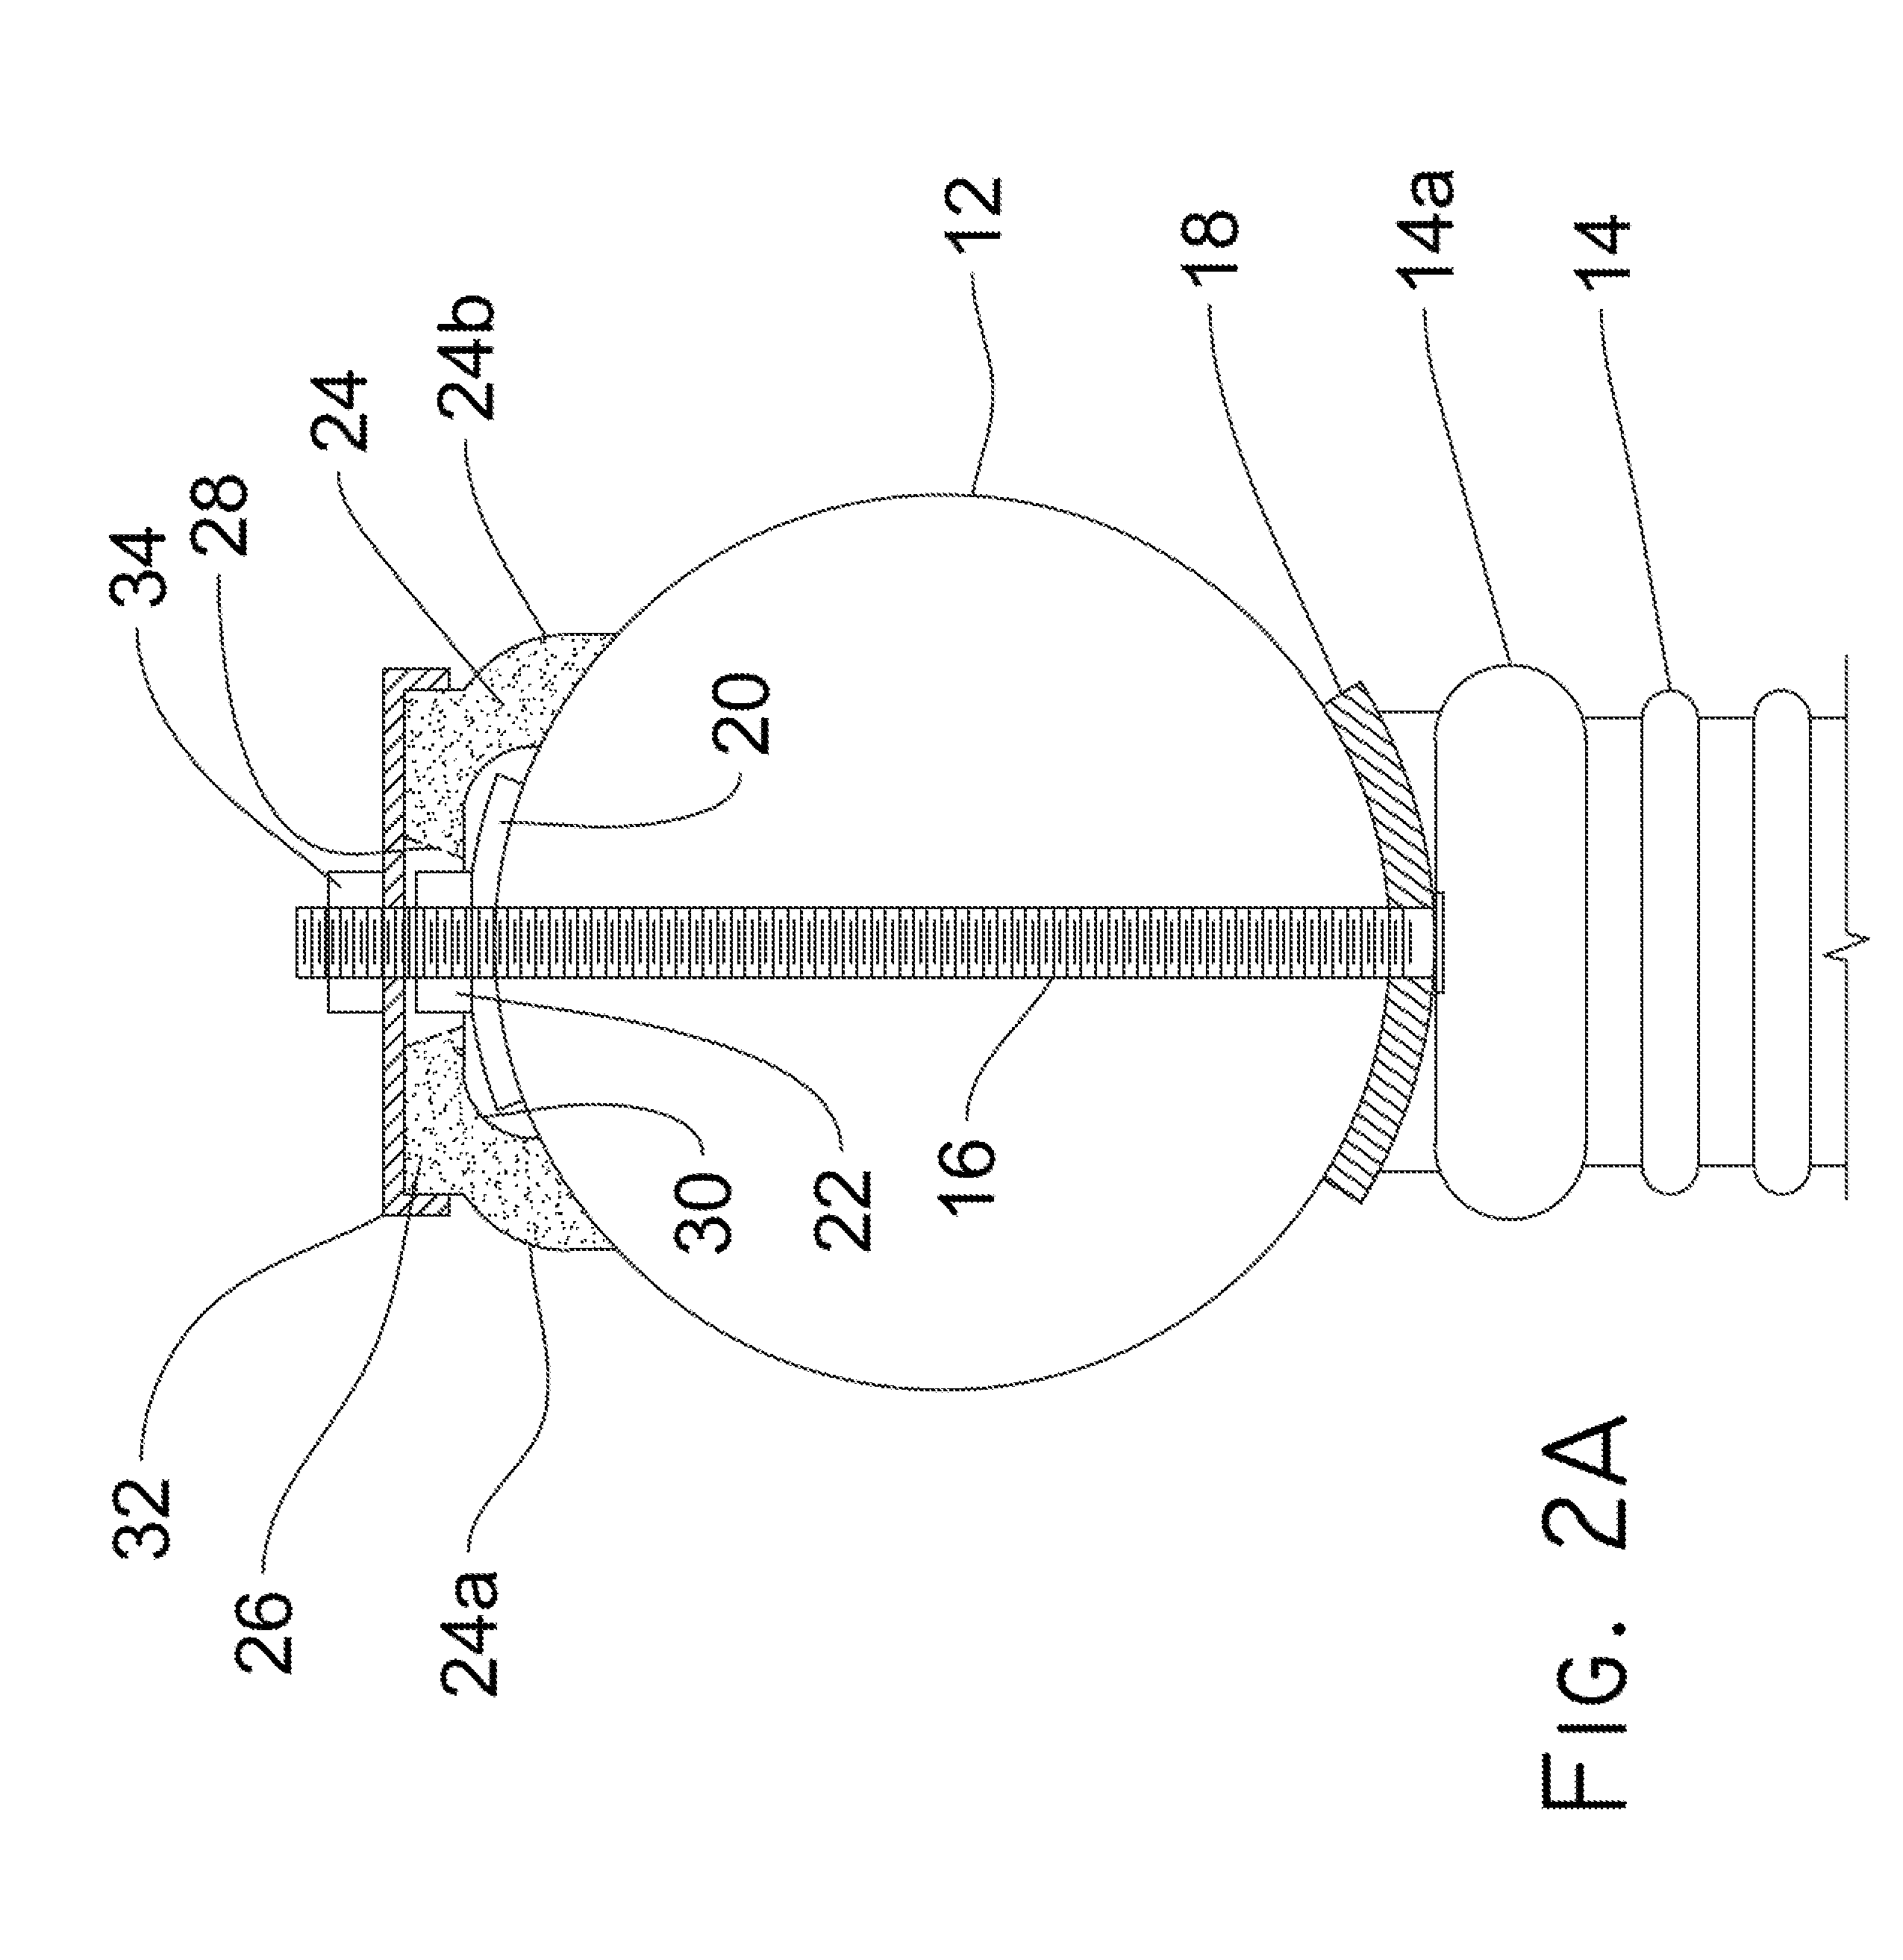 Utility or meter pole top reinforcement method and apparatus